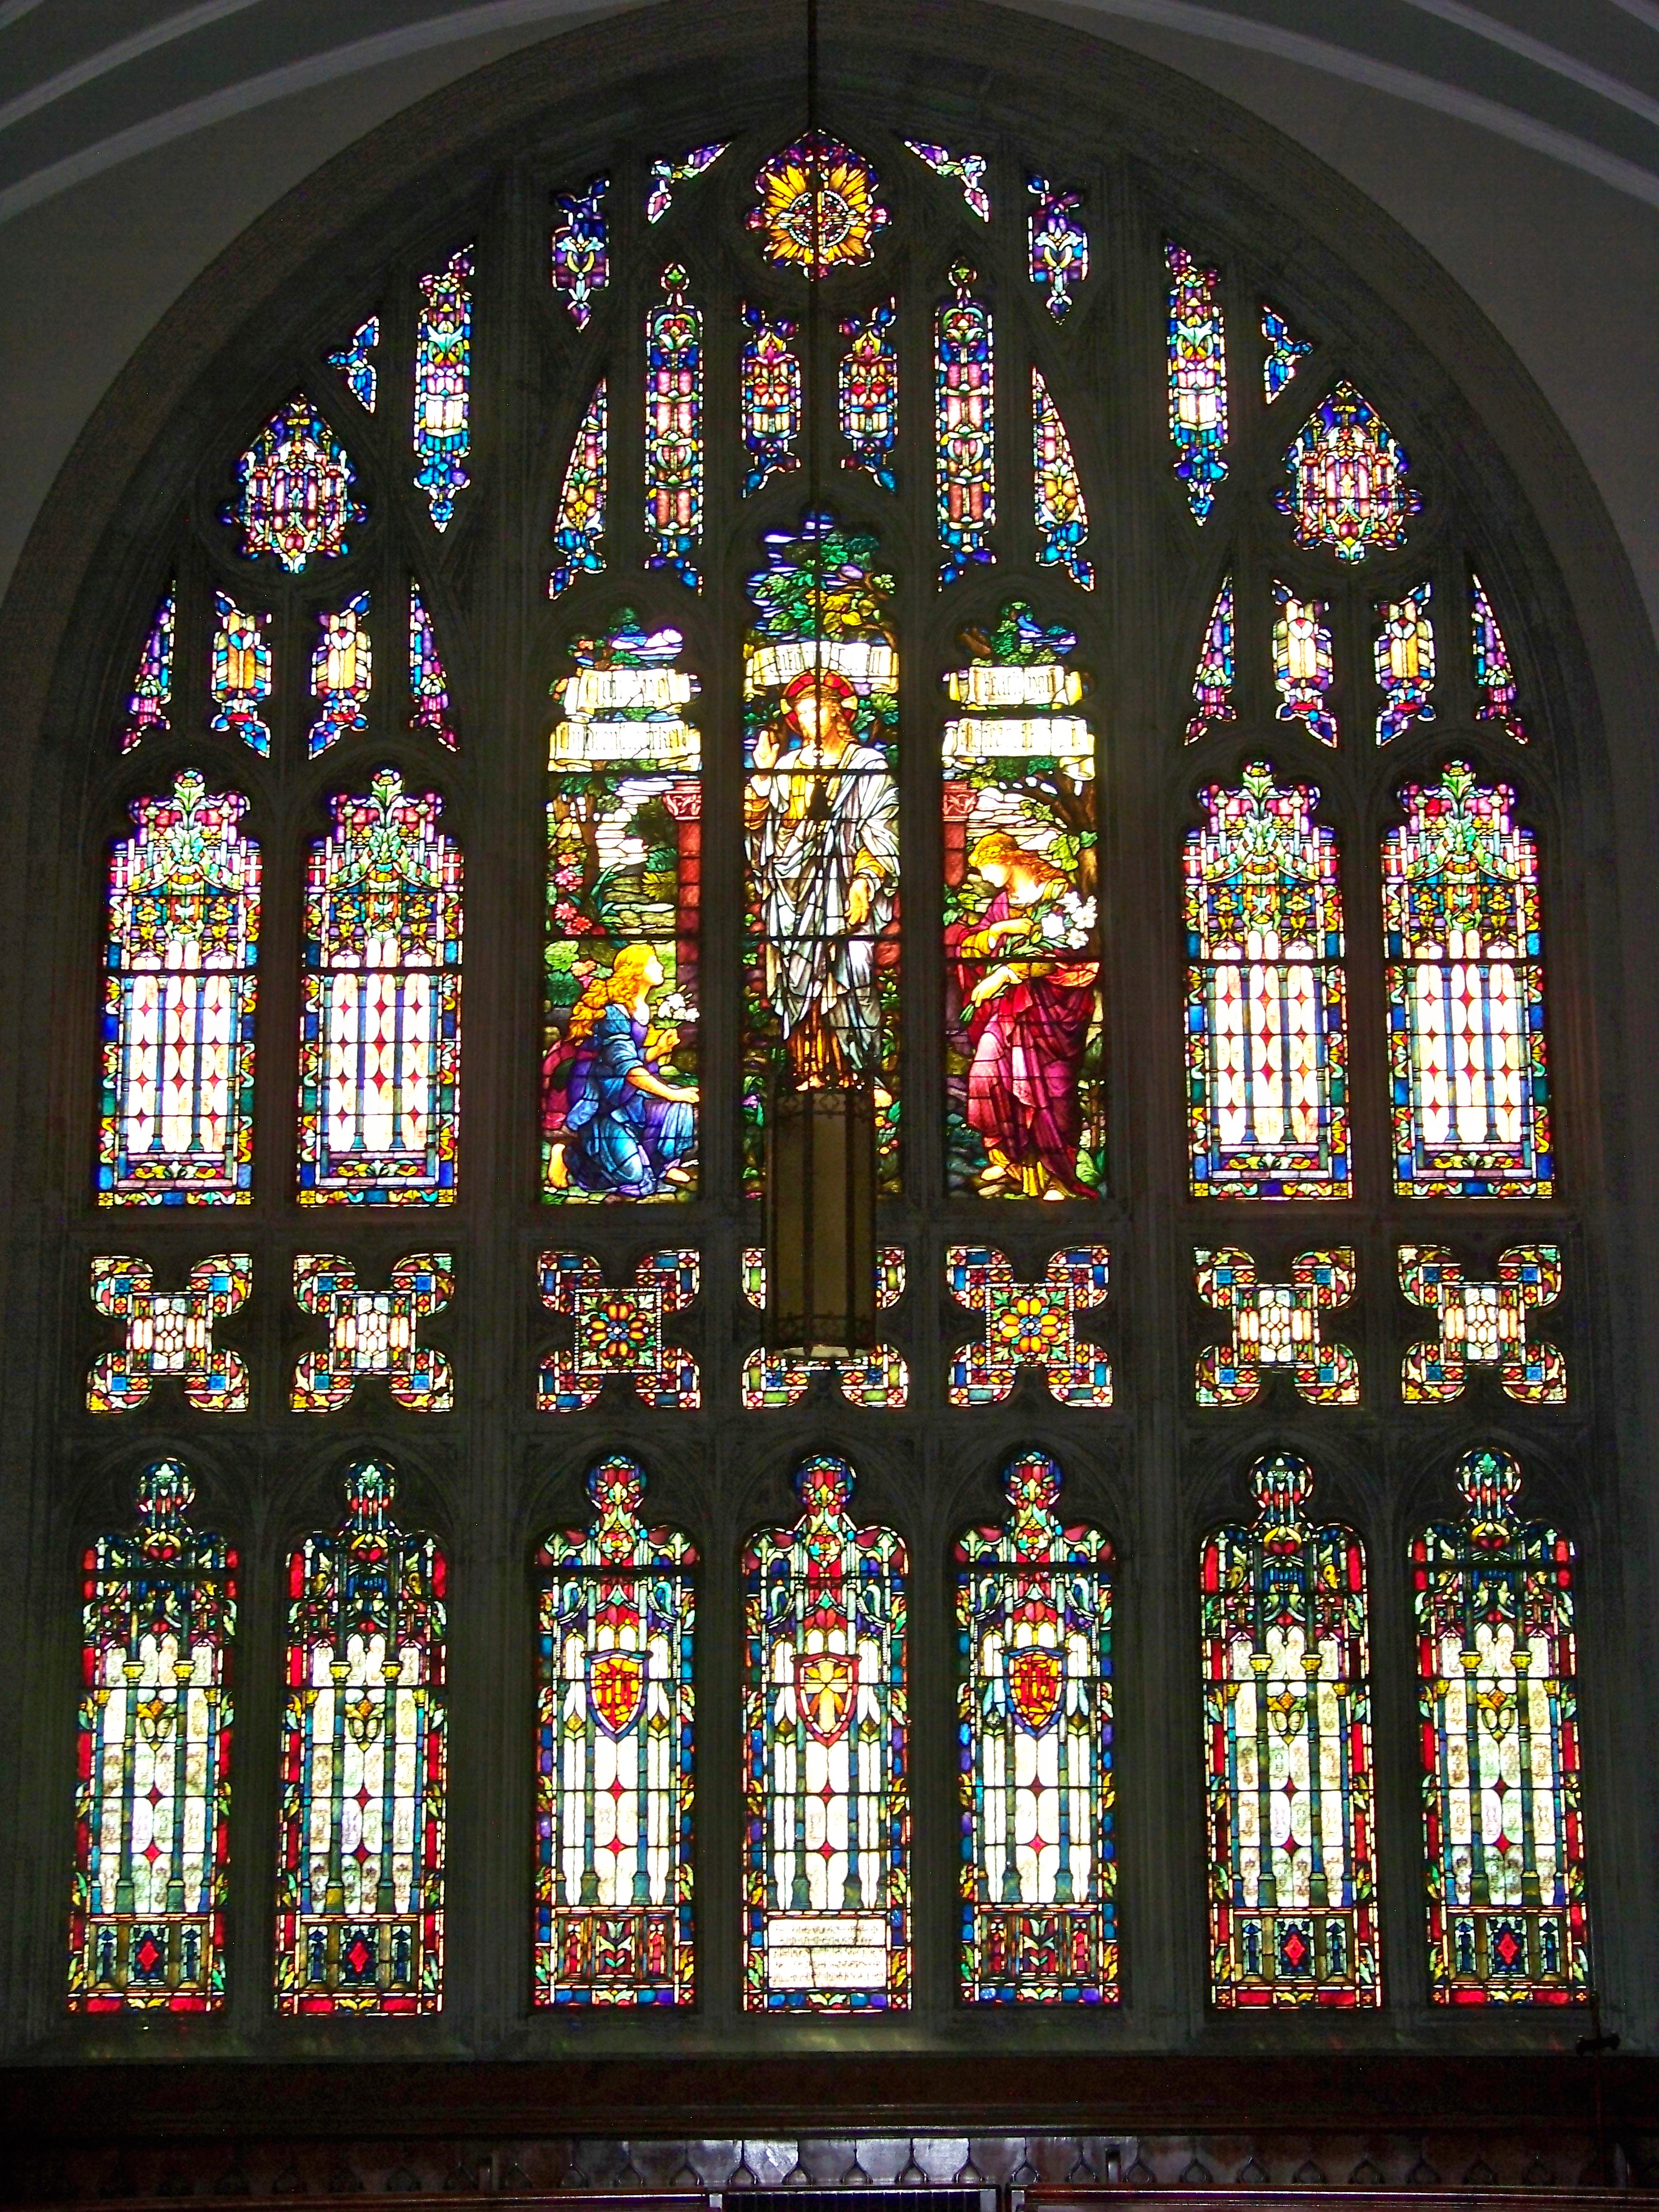 Large stained glass window from the inside